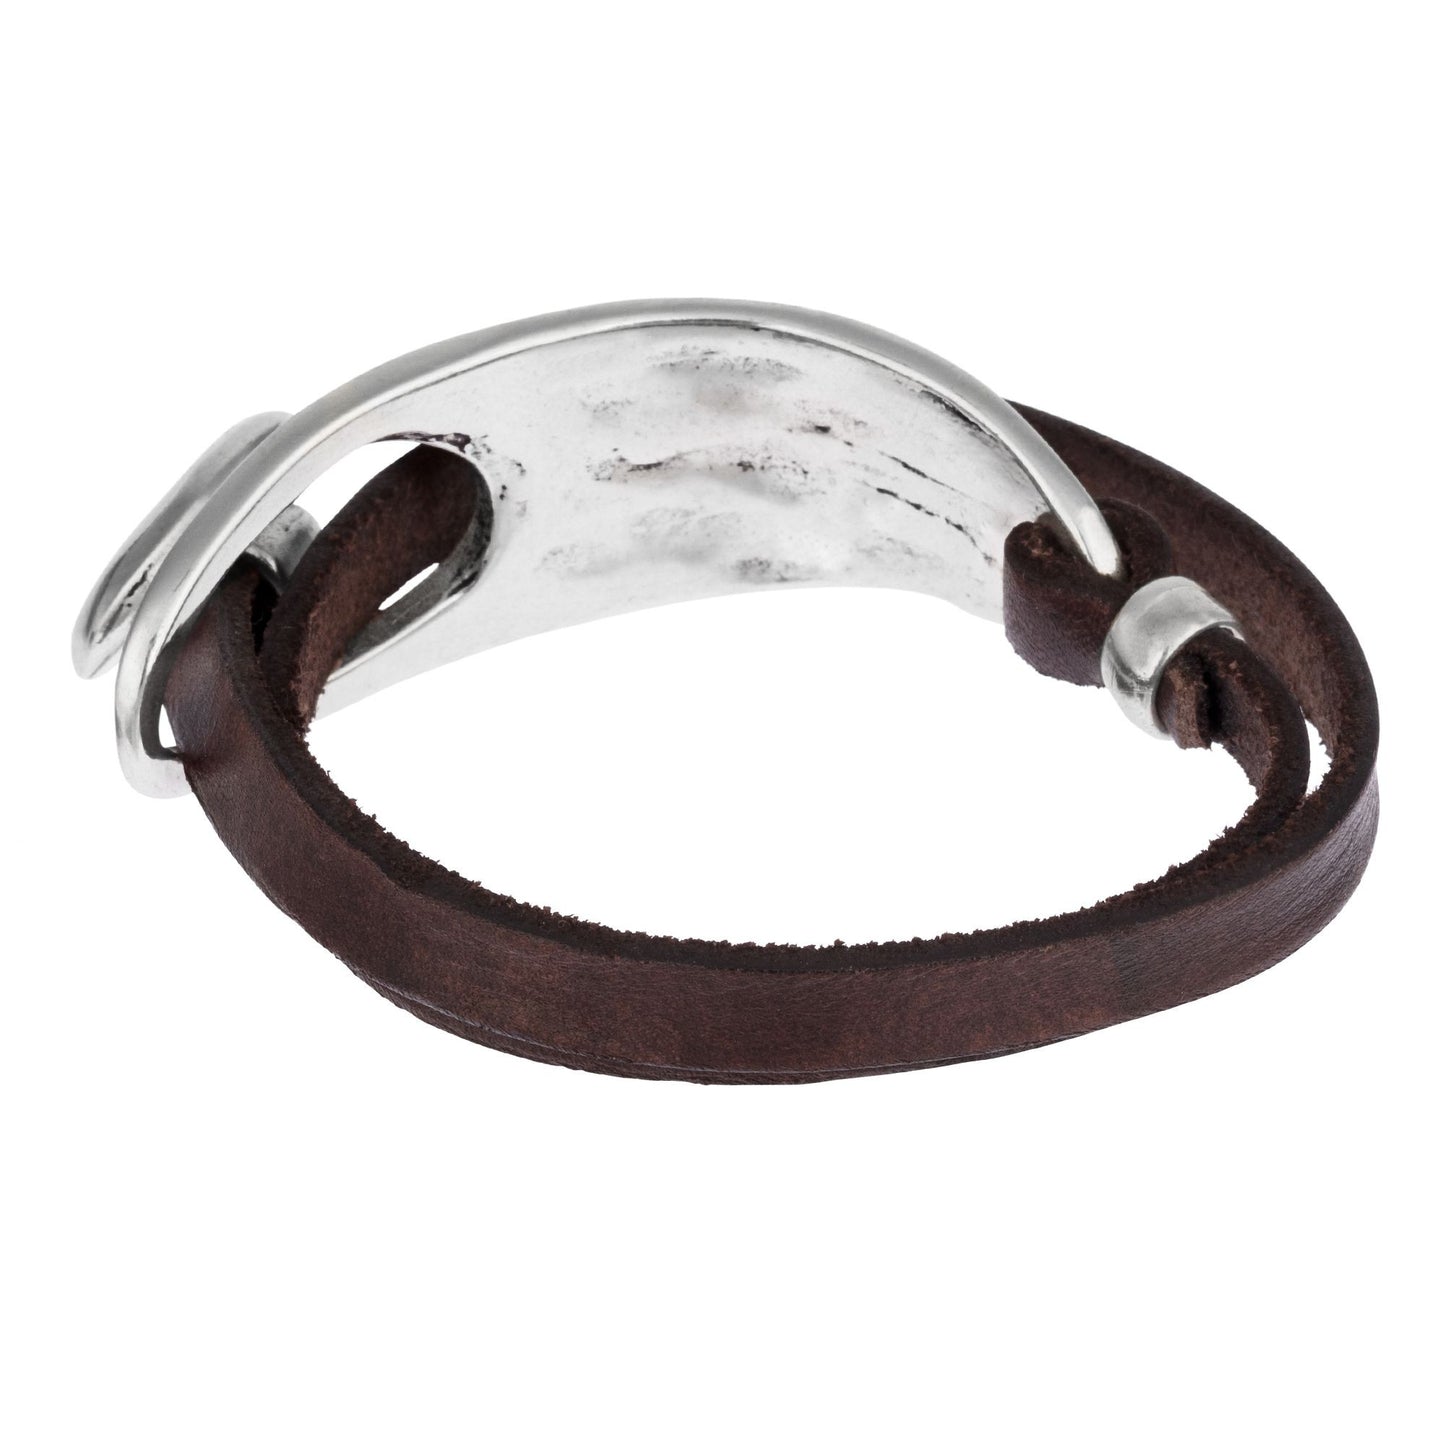 Silver and leather GD double turn brown zamak bracelet